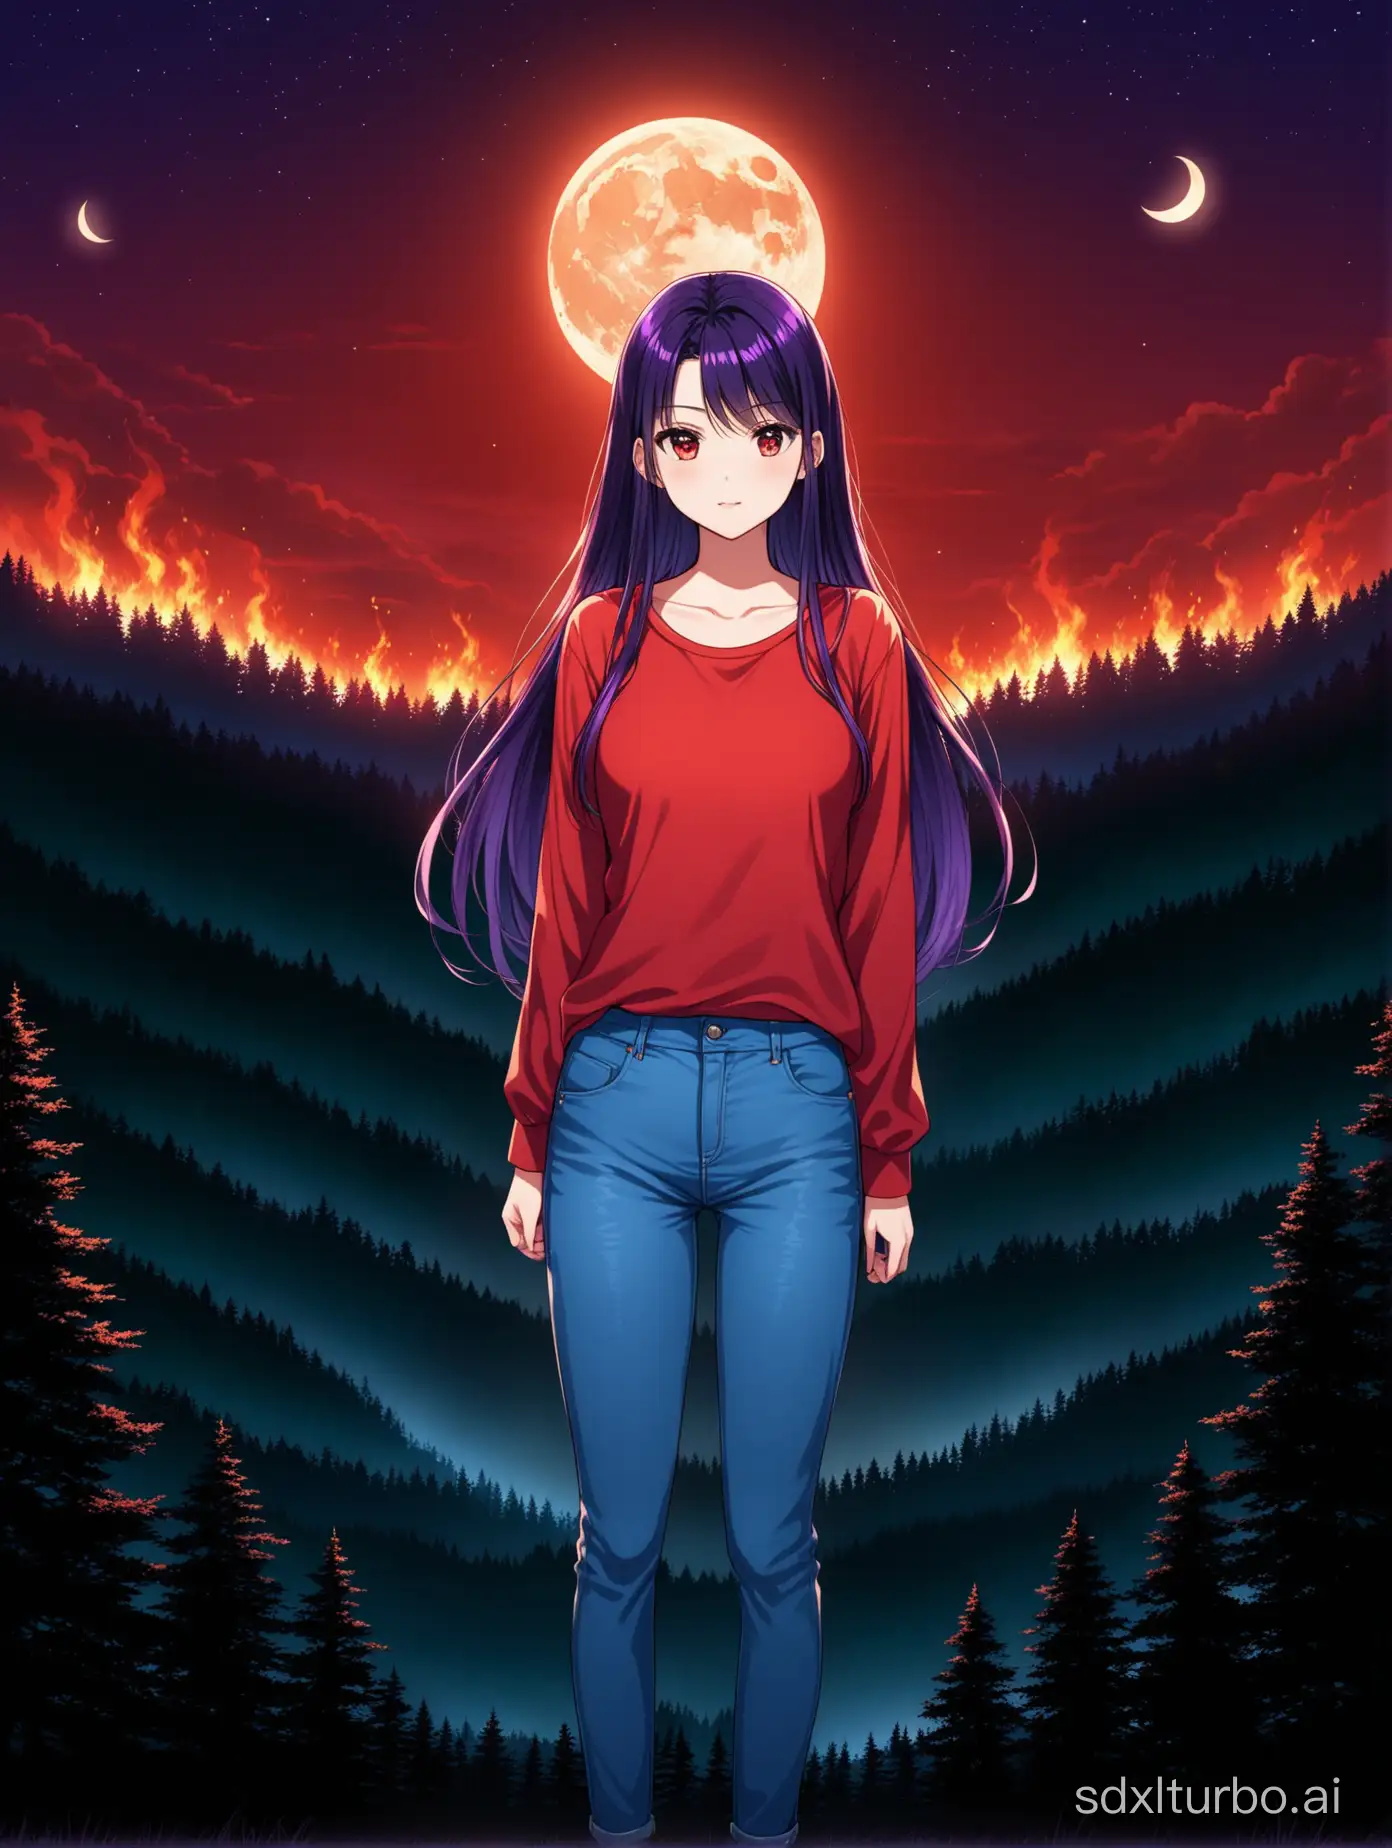 Rei Hino with purple highlights in her hair, in red colored casual clothing and a bluejeans, with a lonely, burning sickle moon on the distant horizon and a dark forest in the background.